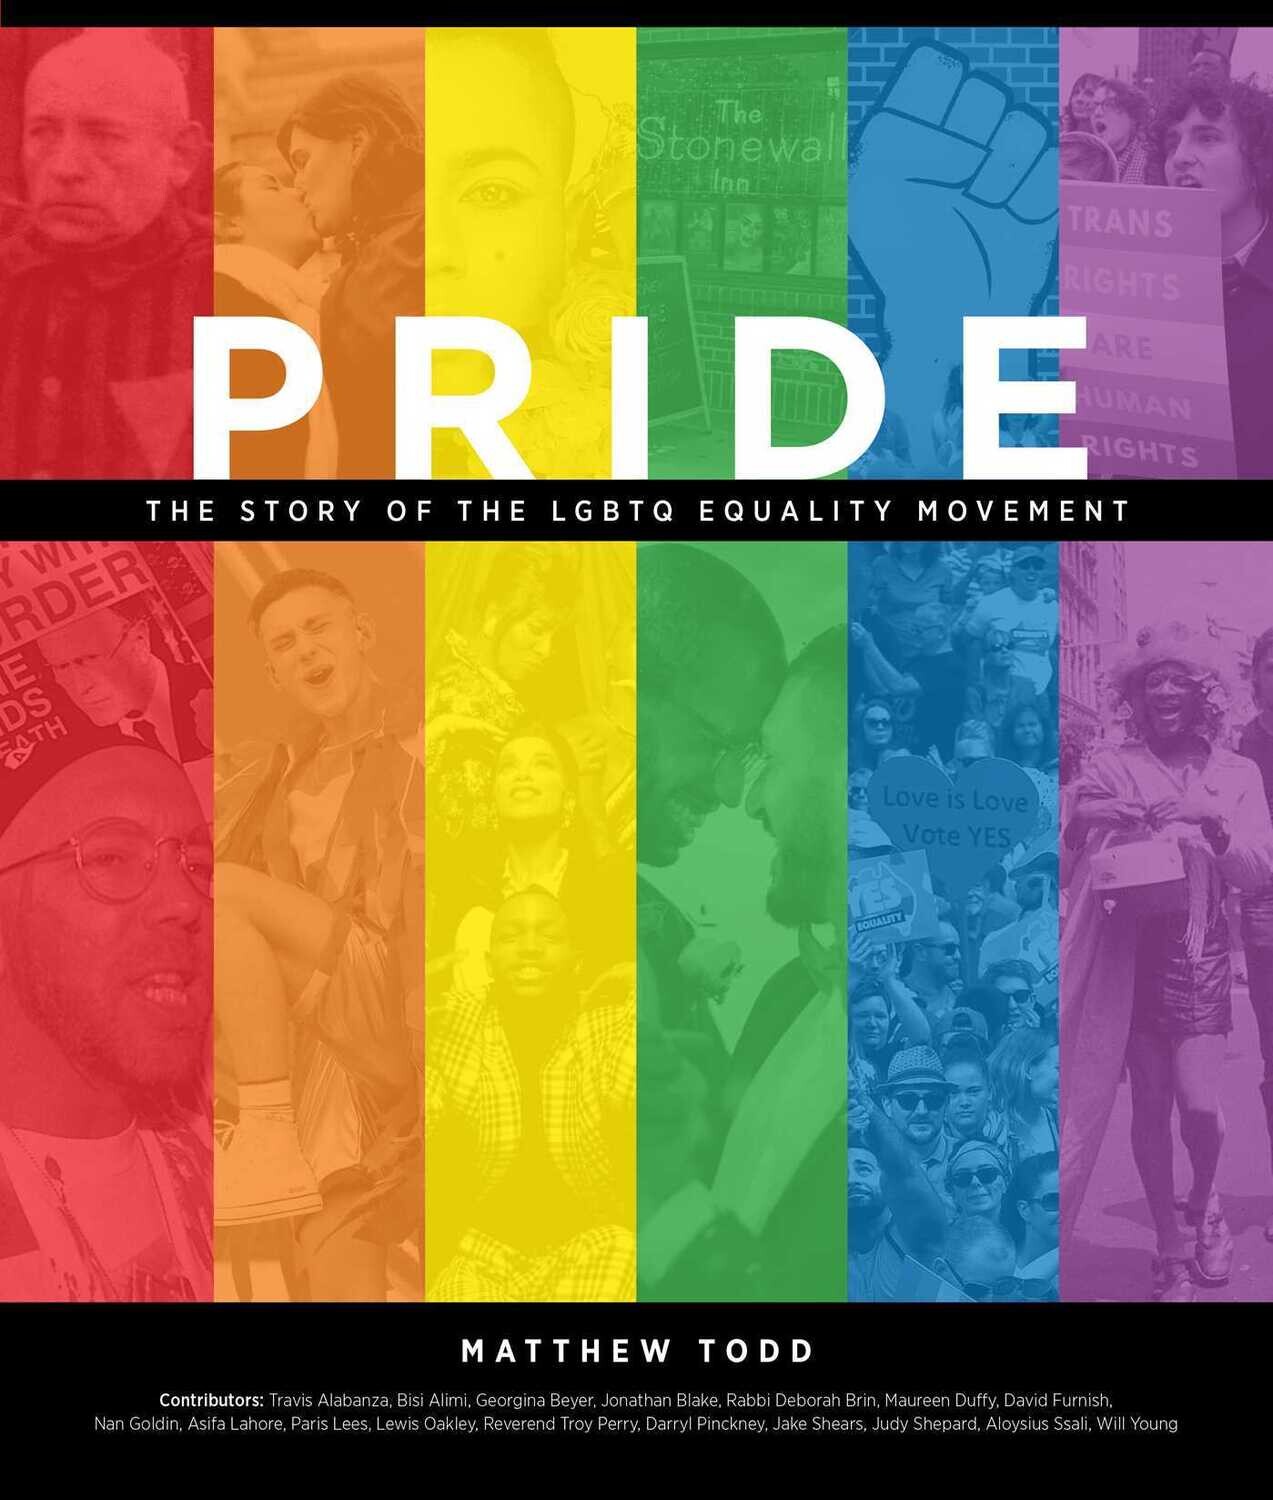 Pride: The Story of the LGBTQ Equality Movement